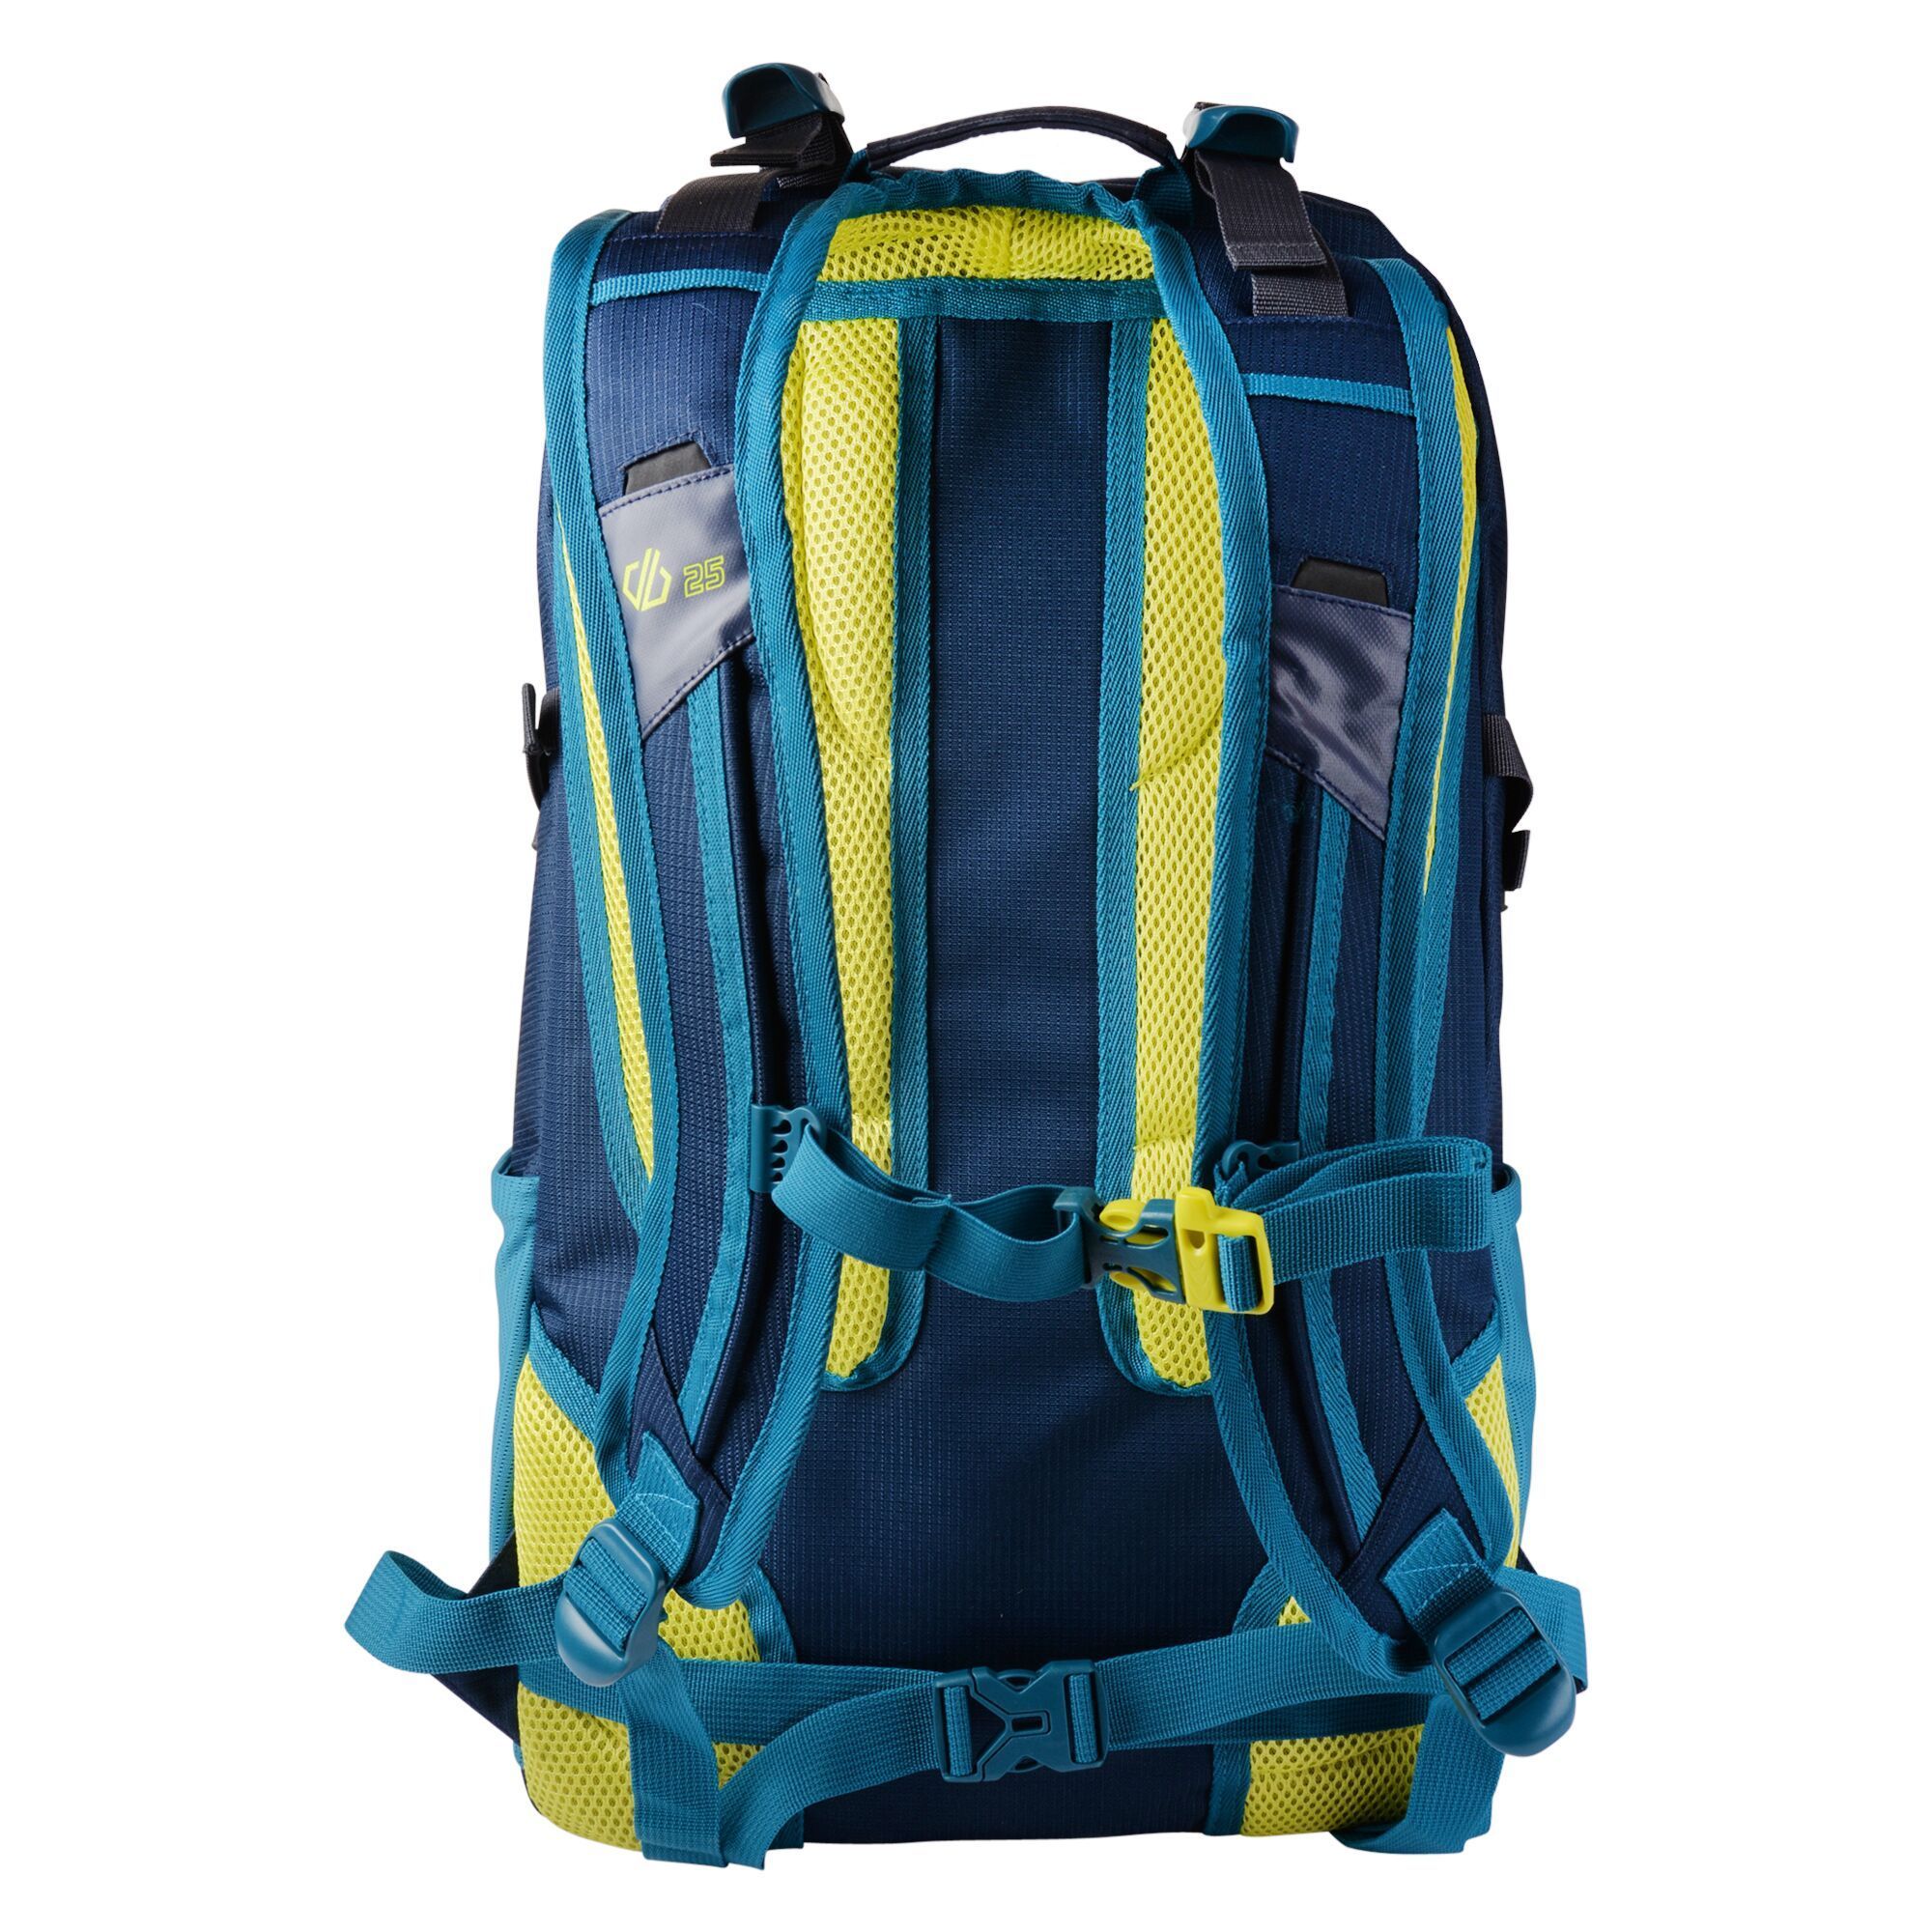 25 litre capacity. Vertical snowboard carry. Diagonal ski carry system. Pack-away front helmet carry. Zipped front pocket. Internal hydration storage pocket and drinking tube retainer. Comfort air mesh backstraps. Adjustable sliding chest harness with built in safety whistle. Padded back panel for extra comfort. Soft micro mesh water bottle side pockets. Easy grab zip pullers. Reflective trim.